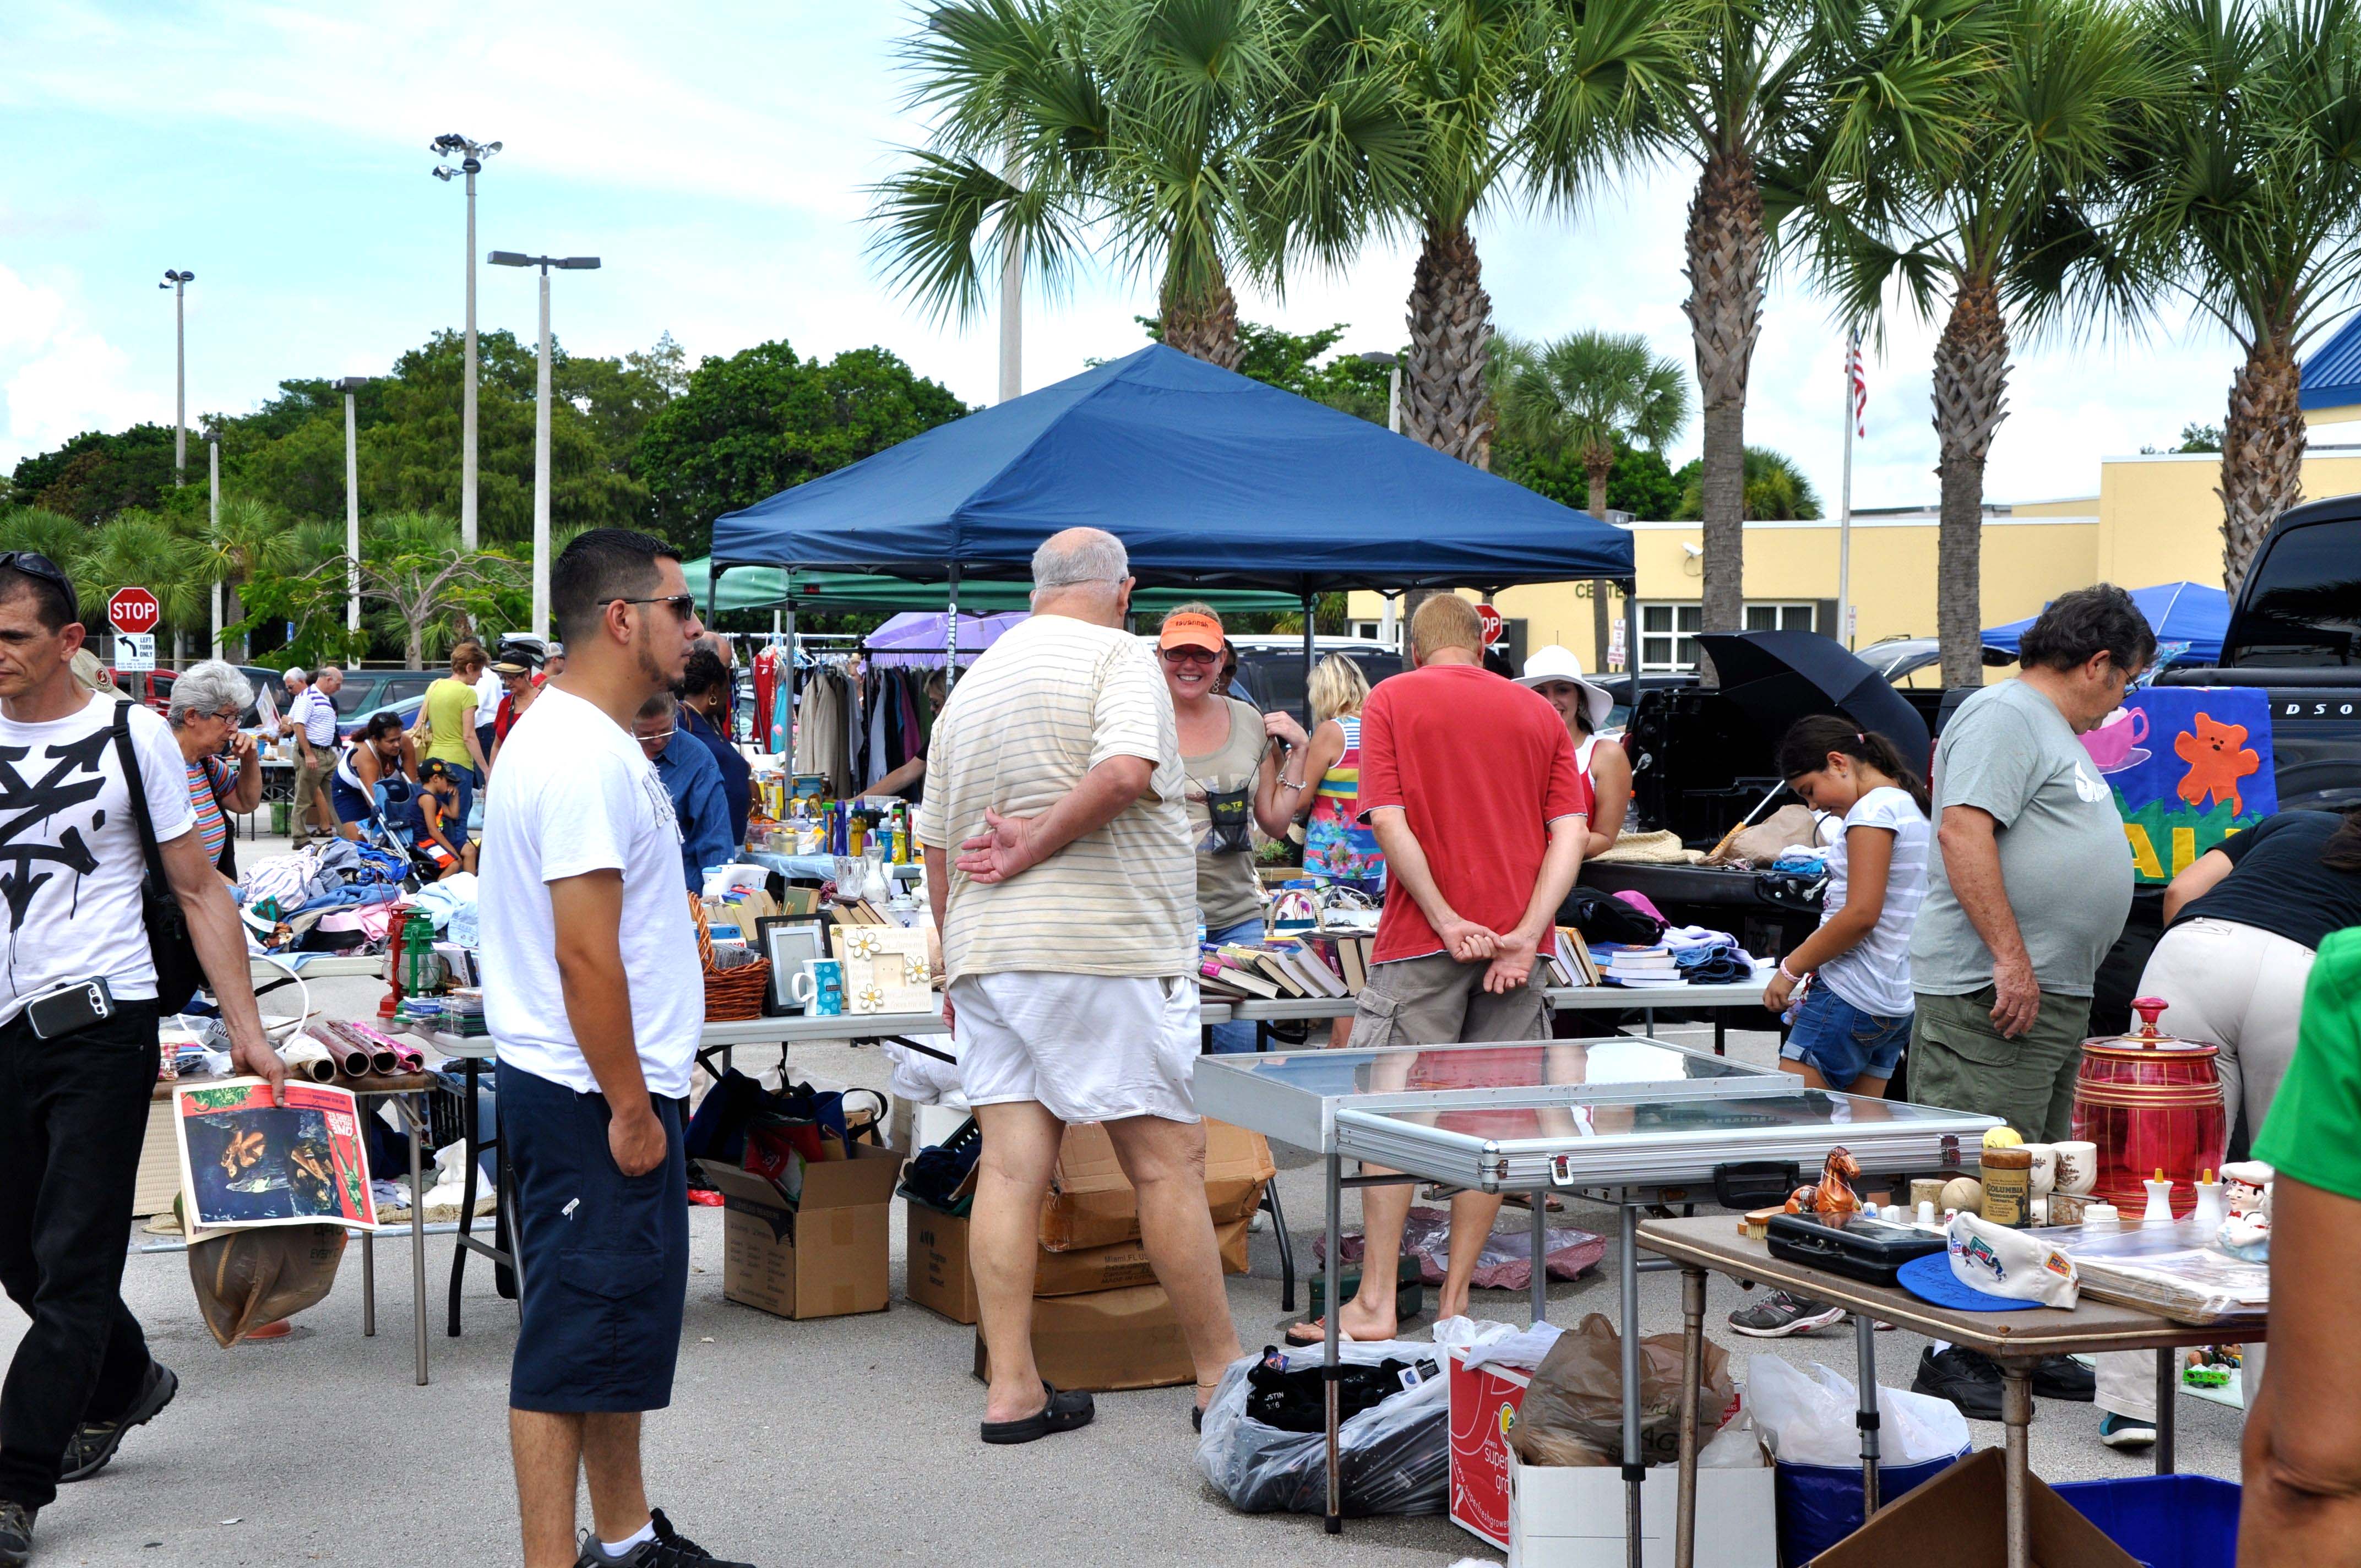 Reserve Your Space at the Next City-Wide Garage Sale